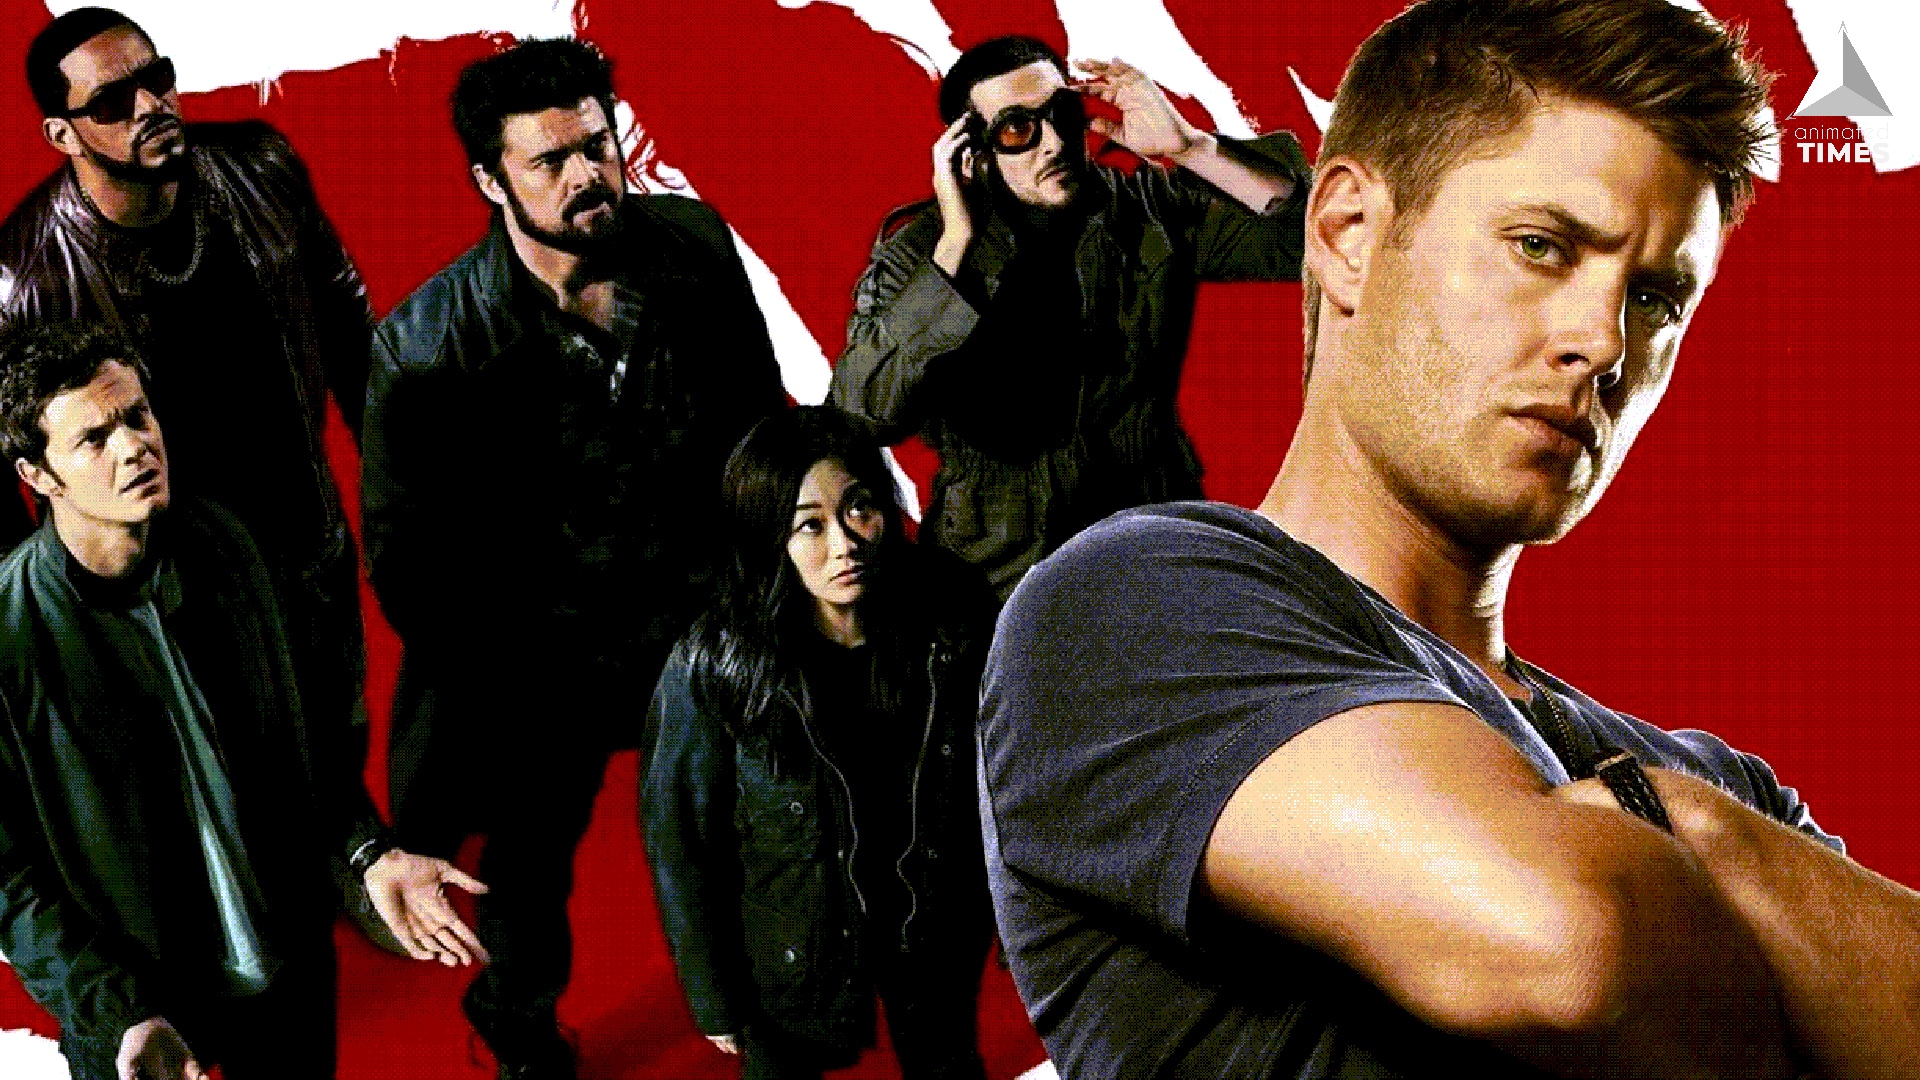 Jensen Ackles Joins The Third Season of The Boys